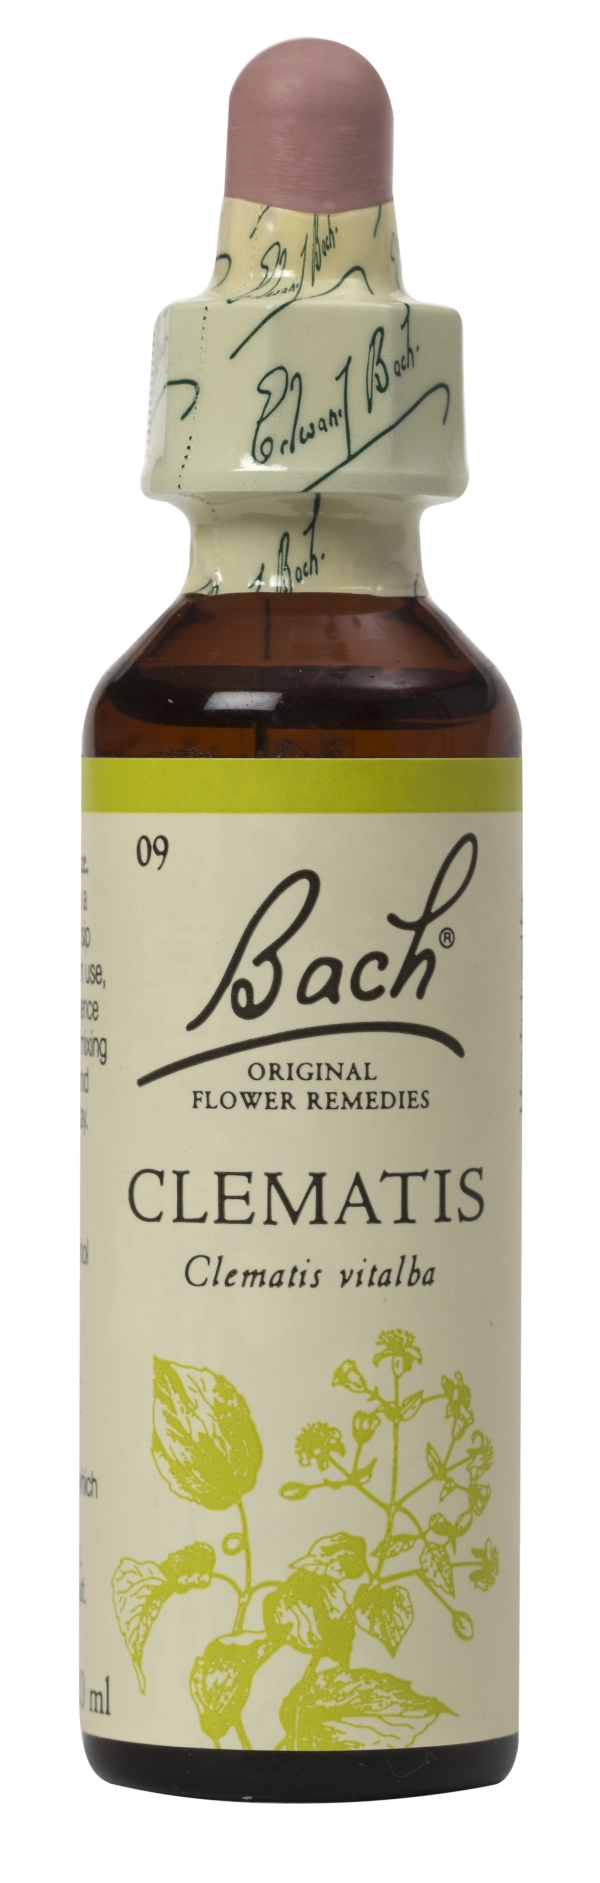 Nelson Bach Flower Remedies: Bach Clematis Flower Remedy (20ml) available online here